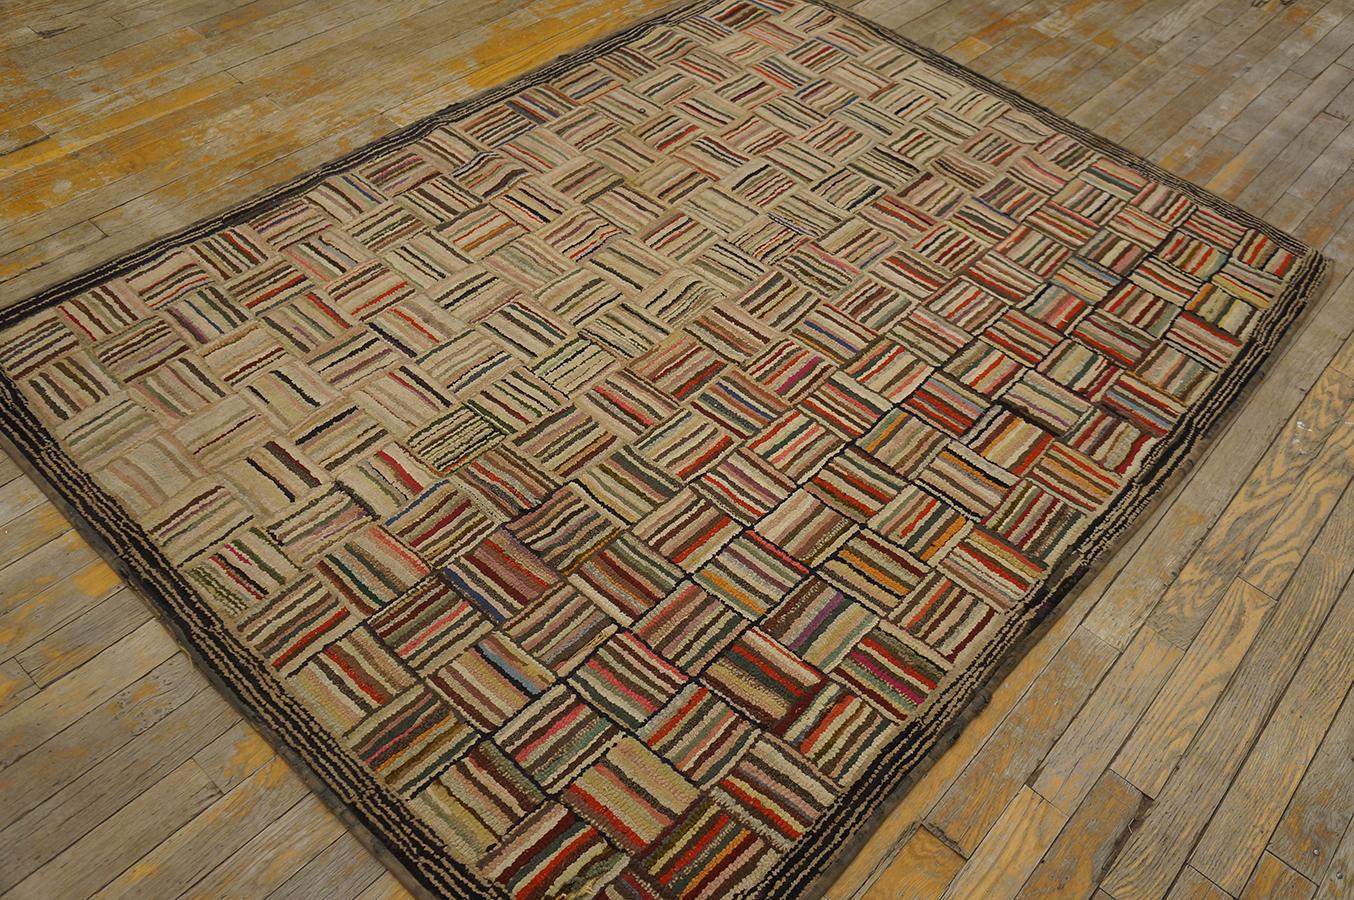 Antique American Hooked Rug, Size: 4'3